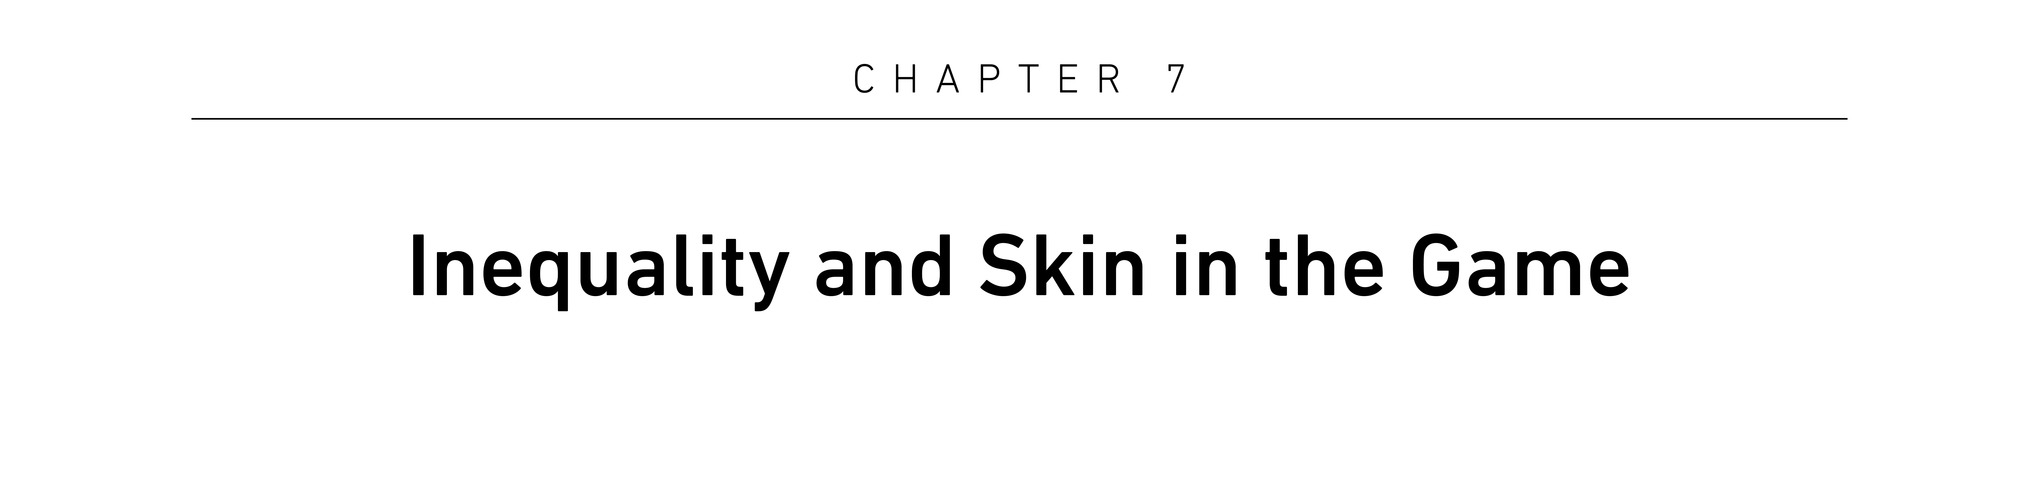 Chapter 7 Inequality and Skin in the Game